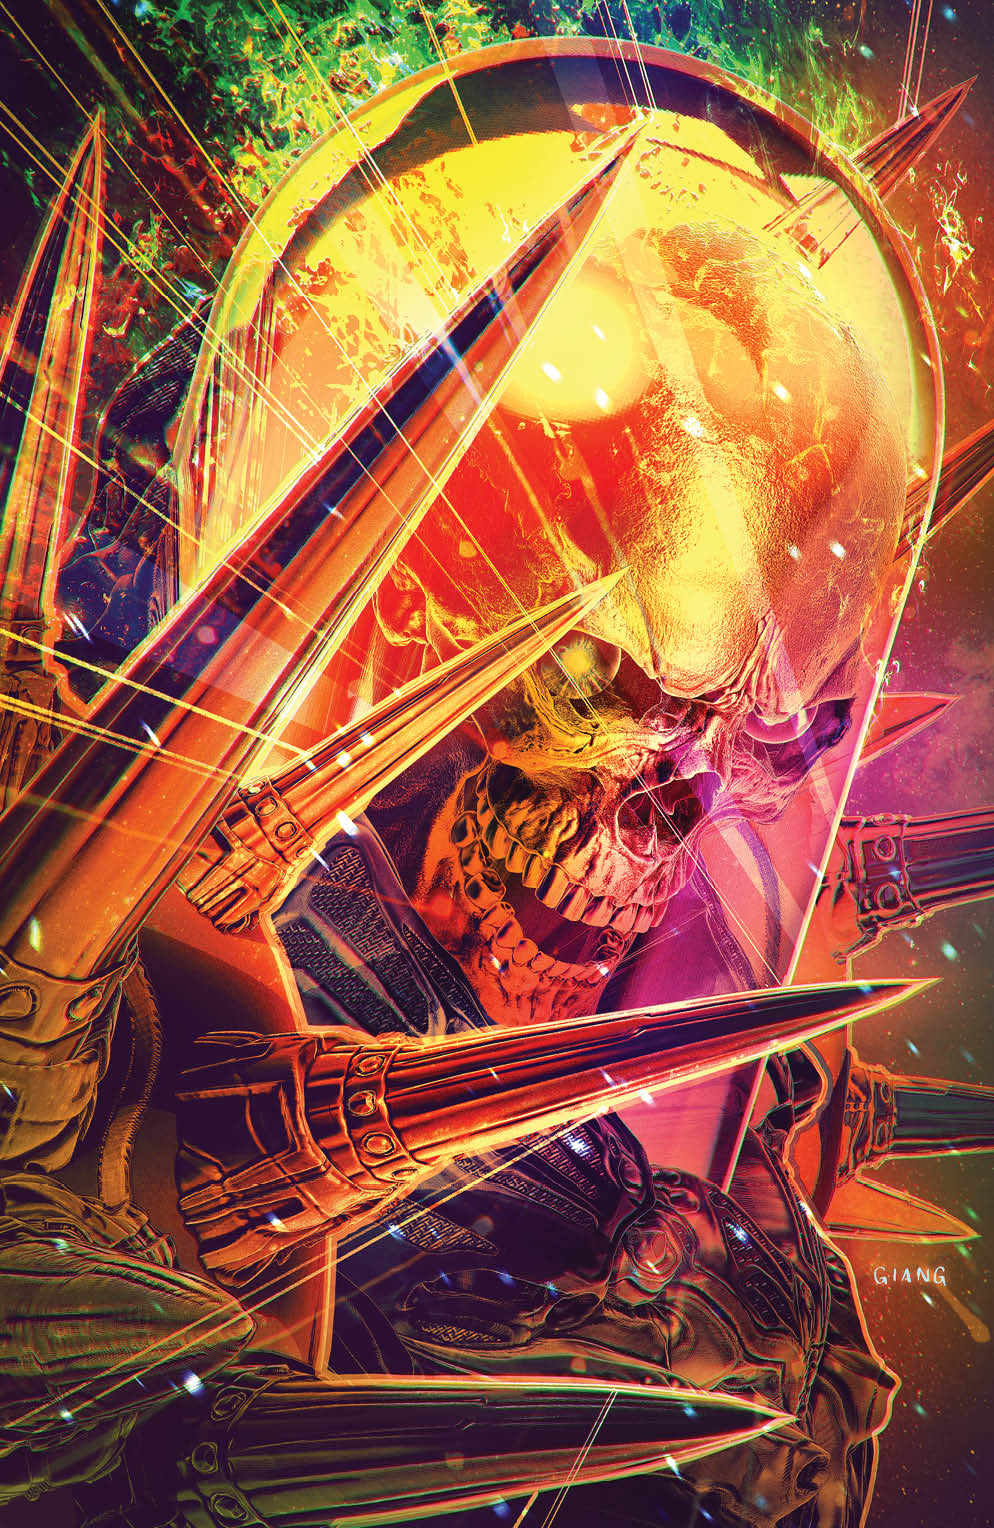 COSMIC GHOST RIDER #1 JOHN GIANG EXCLUSIVE VARIANT OPTIONS (M3)(M4)